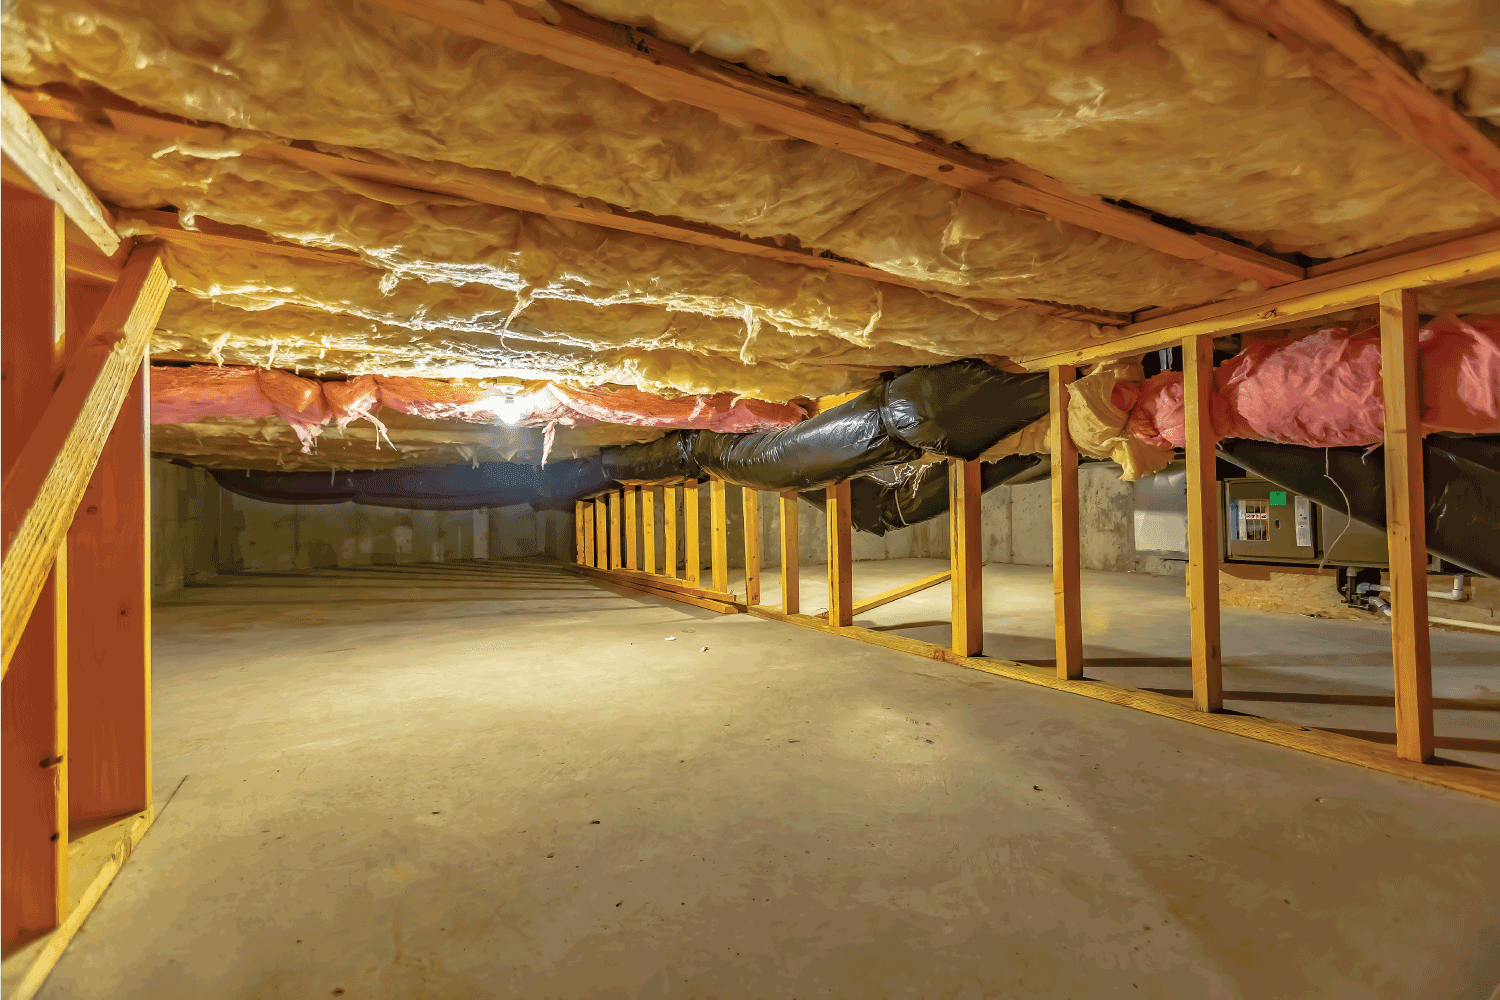 Basement or crawl space with upper floor insulation and wooden support beams. An area of limited height under the floor of a house with concrete wall and floor.